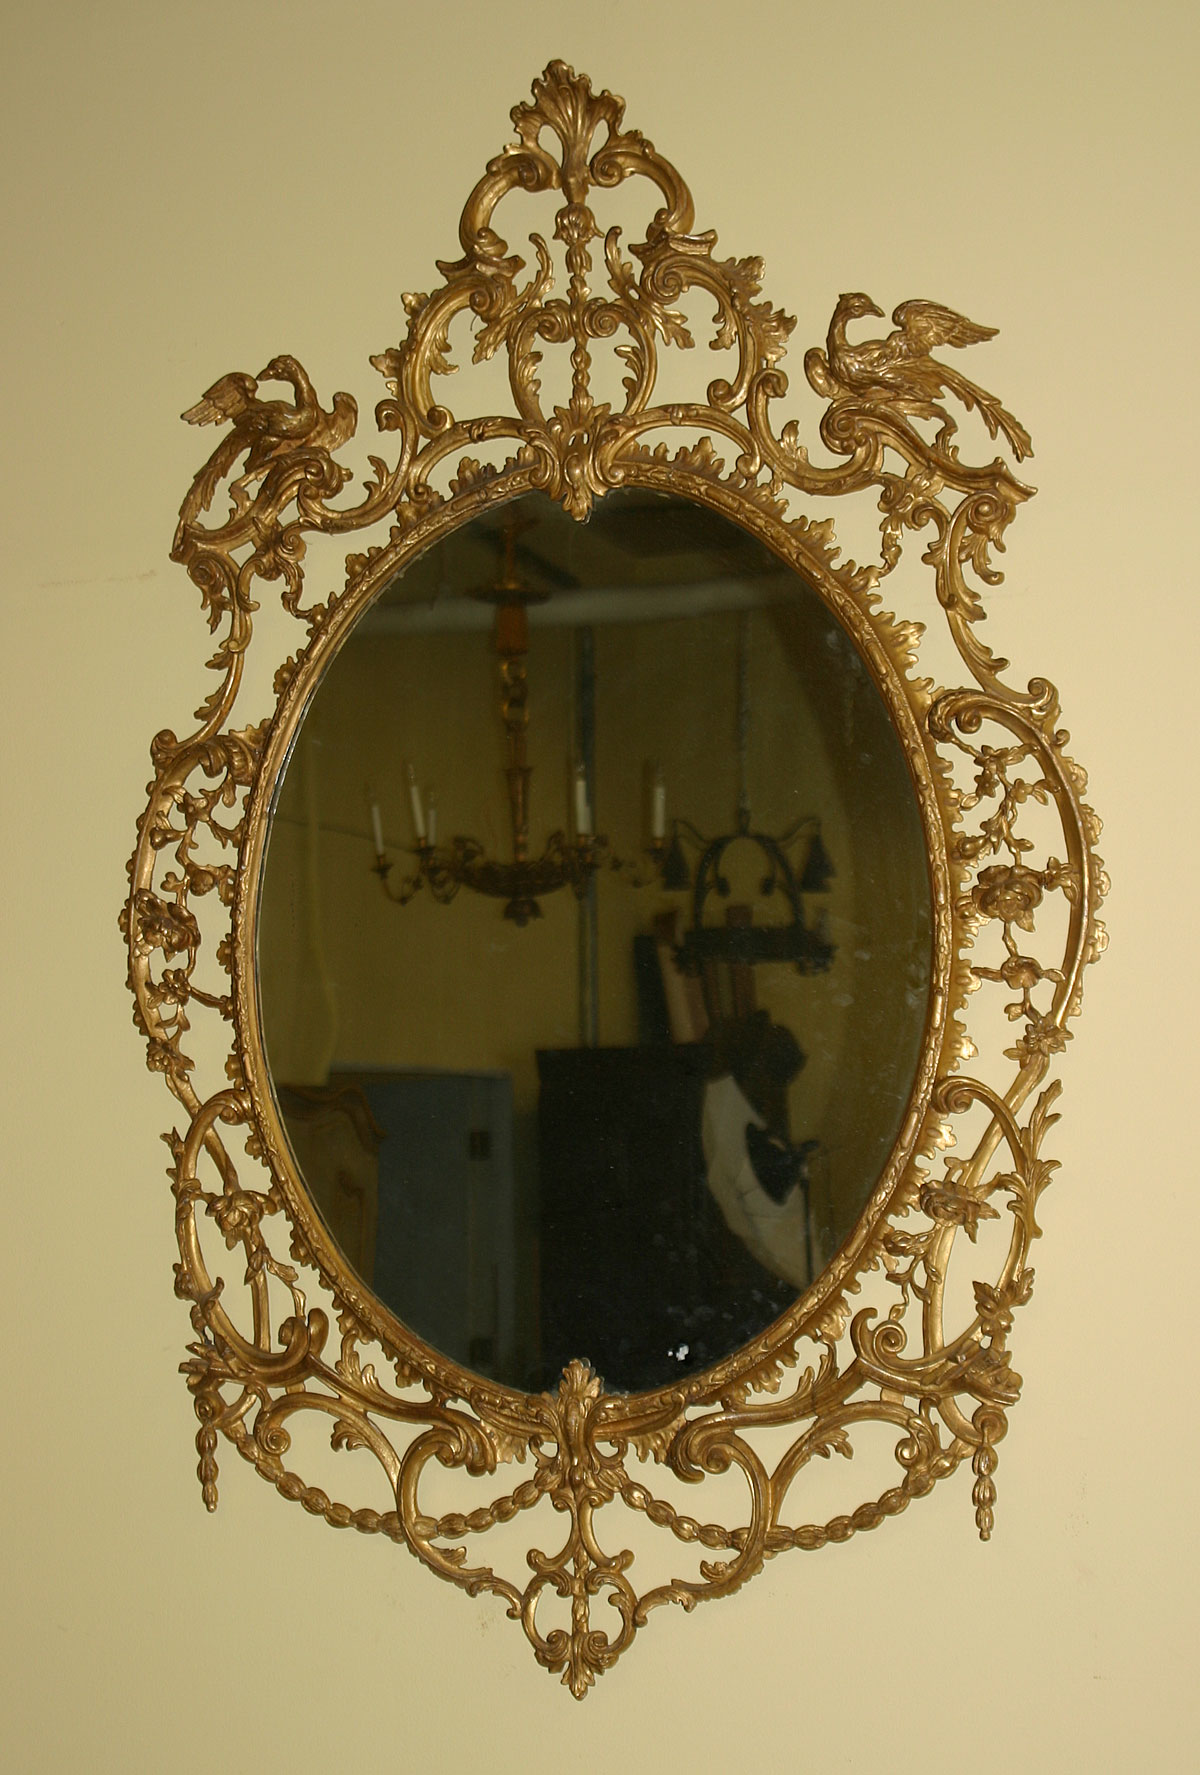 George III period, oval, carved giltwood mirror